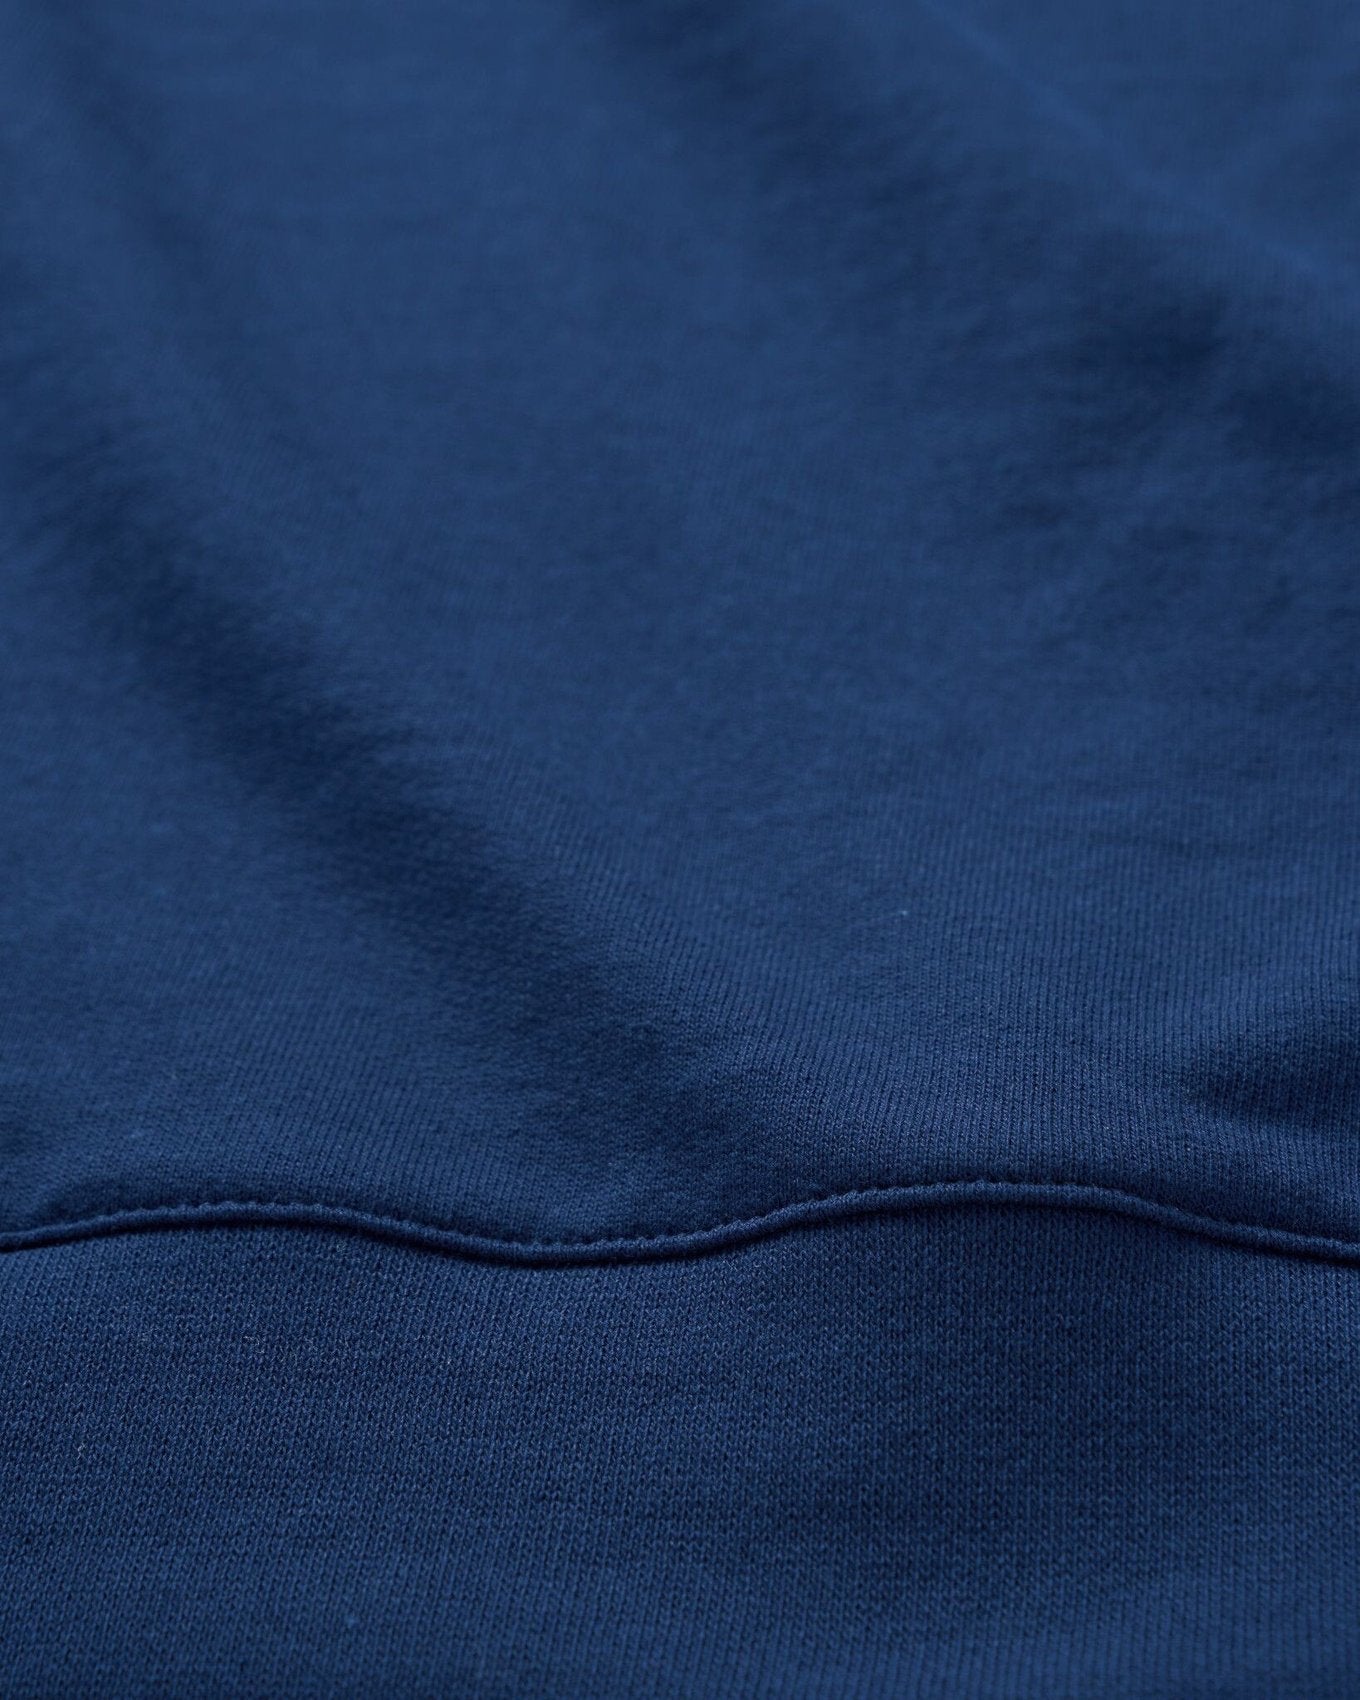 ReApparel Trash Crew Neck . in color Navy Blue and shape long sleeve